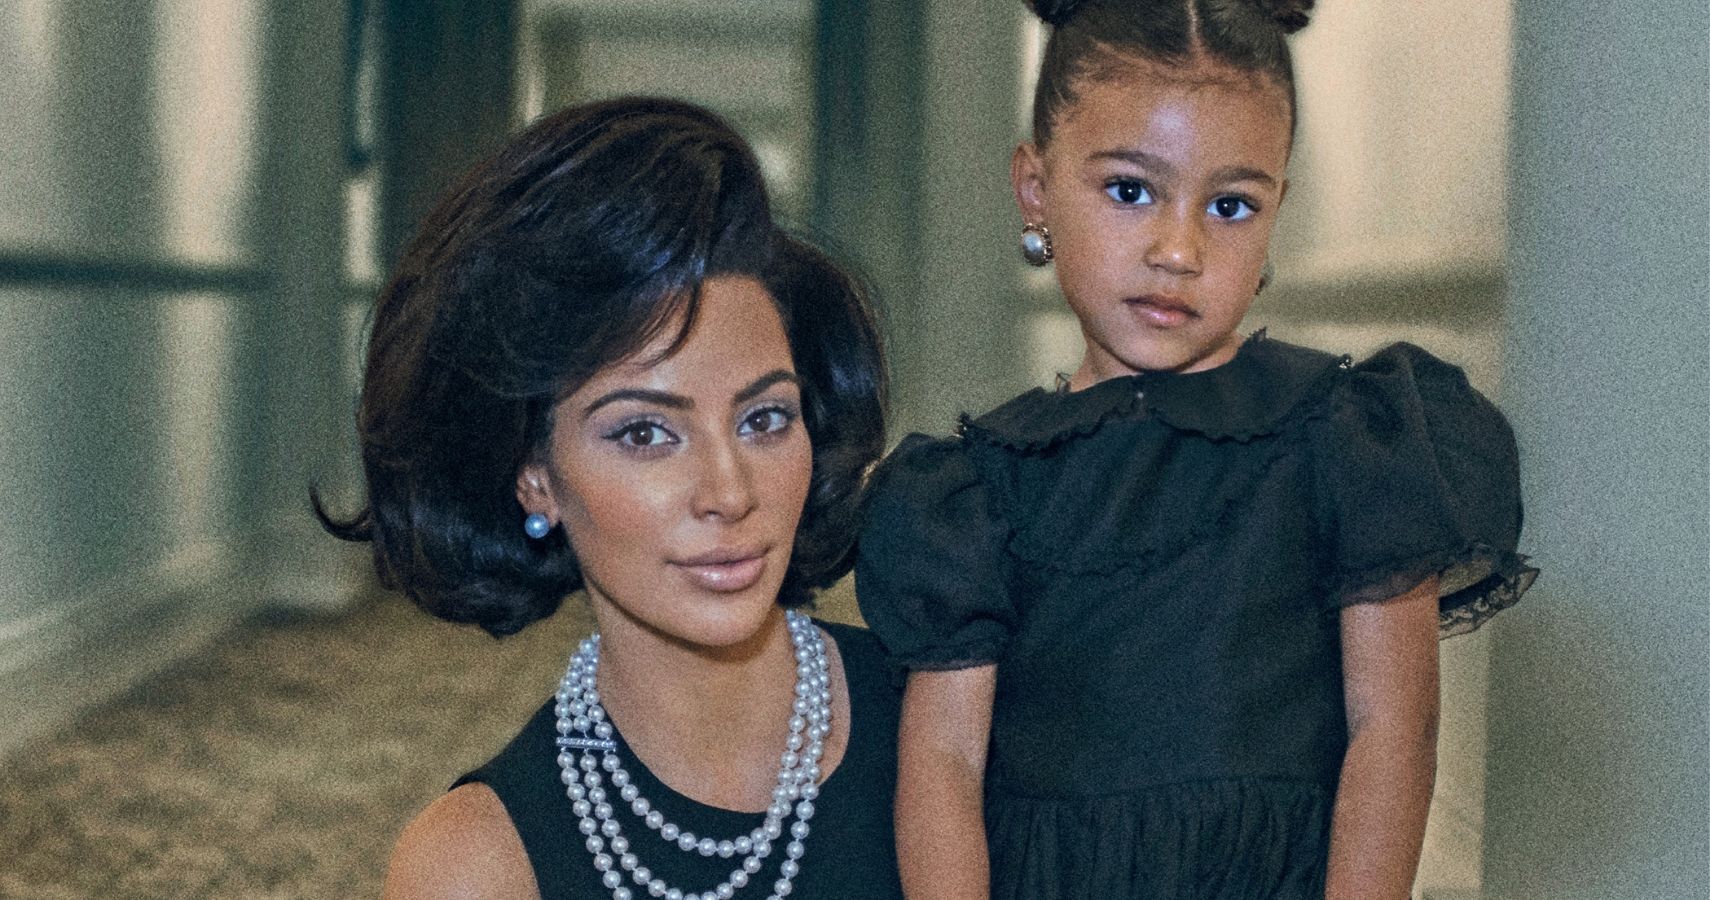 Kim Kardashian Shares Sweet Selfie With Oldest Daughter North To Commemorate Her Birthday